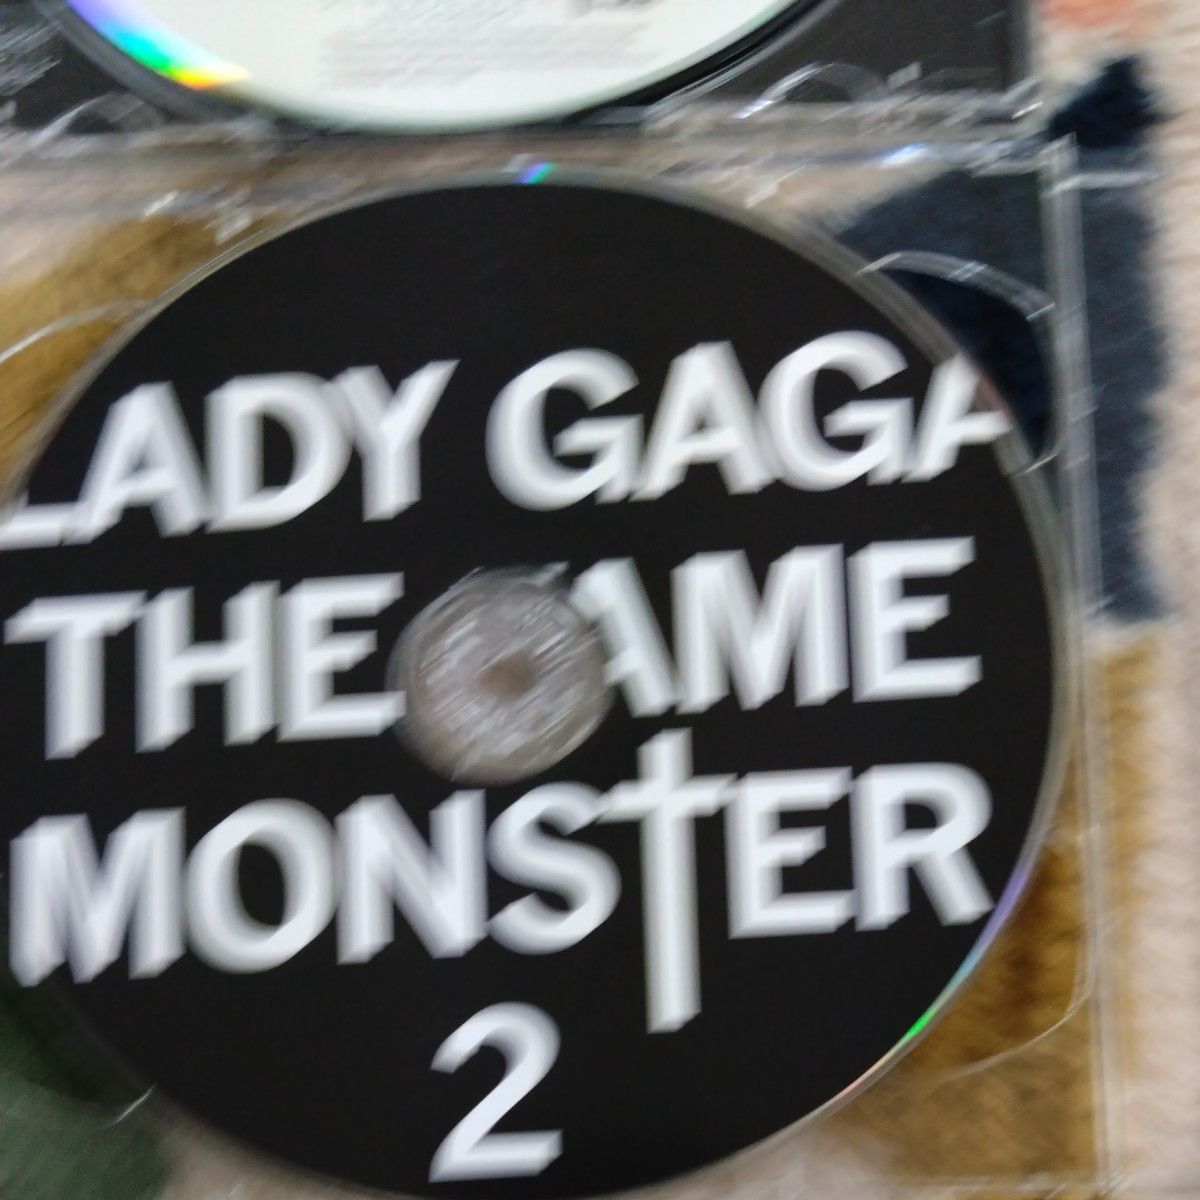 LADY GAGA アルバム2組セット 「BORN THIS WAY」「THE FAME MONSTER（CD2枚組）」